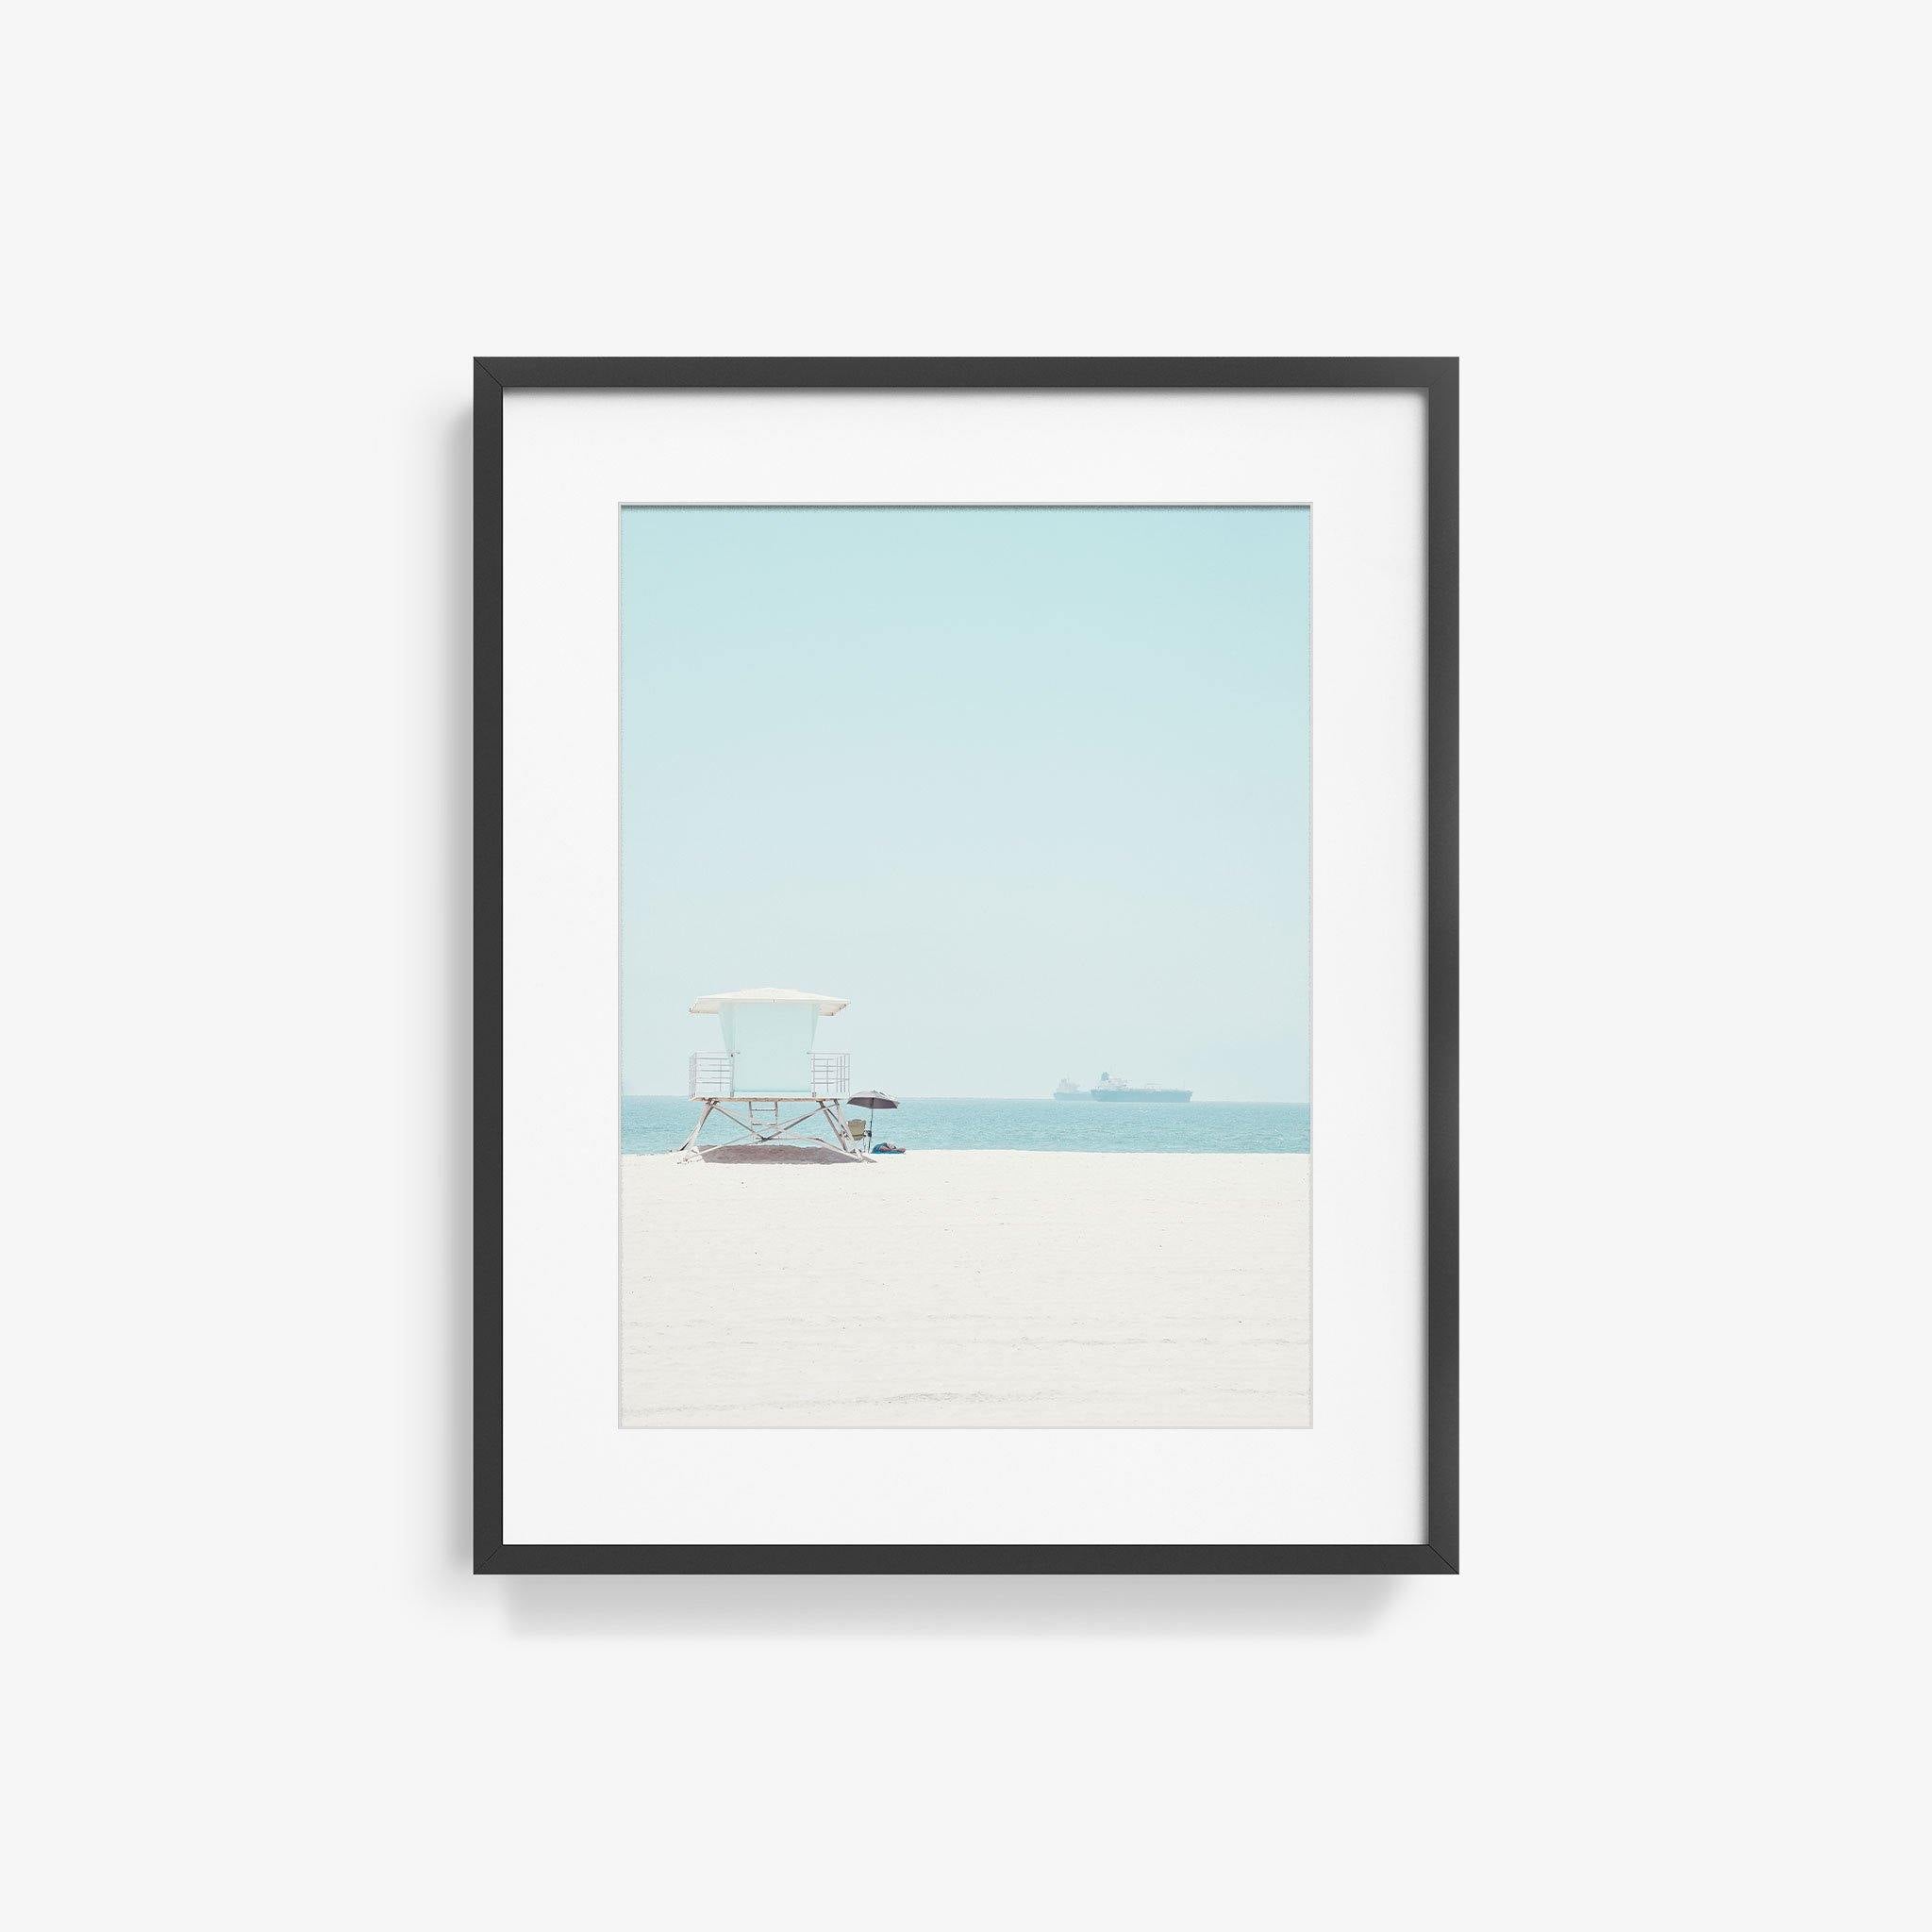 Los Angeles Beach, Photography  by  Los Angeles Beach Tappan